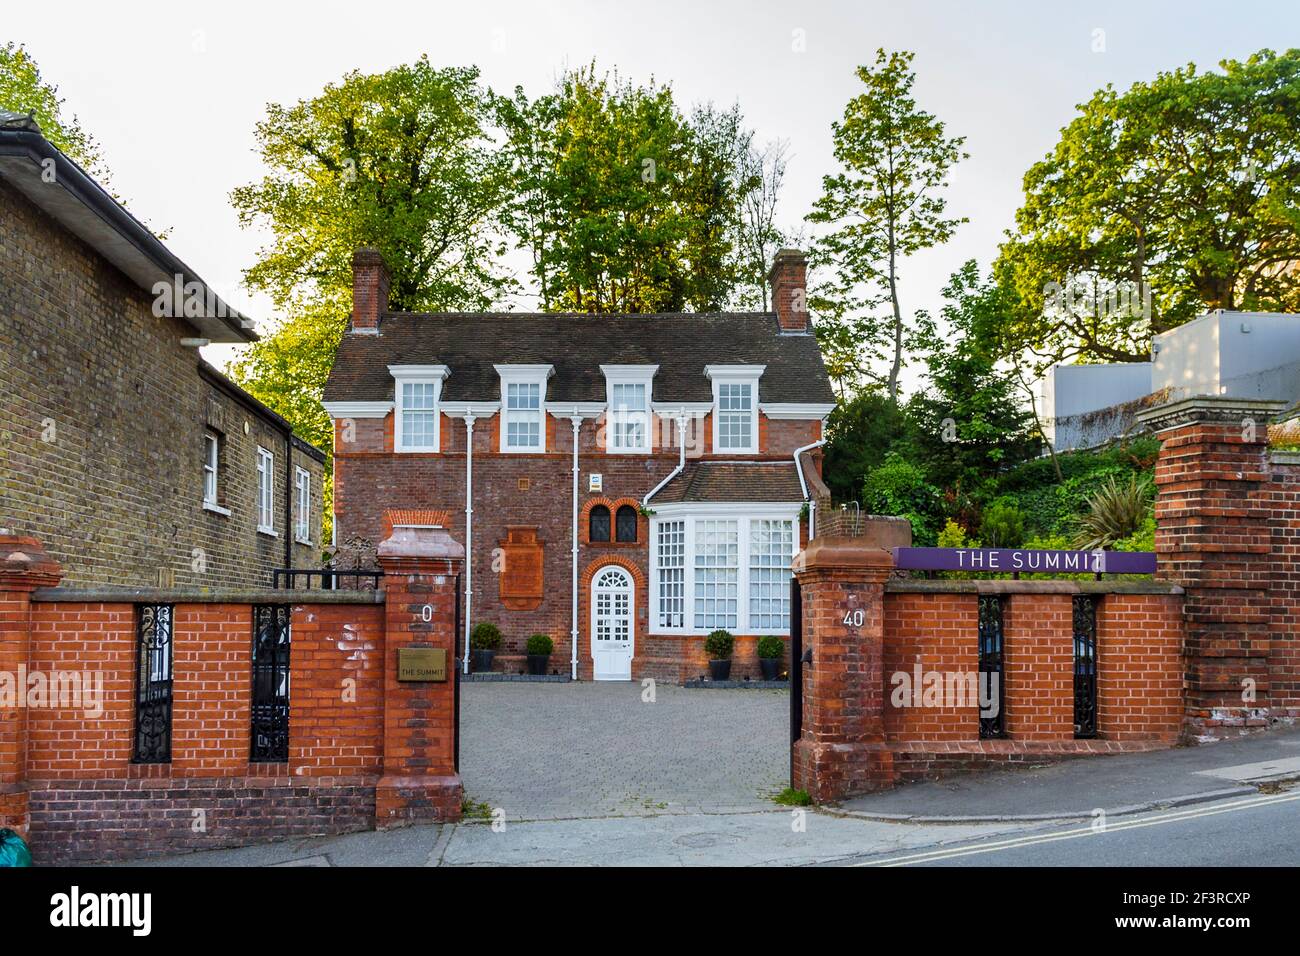 The Summit, a Clinical Psychology and Psychotherapy treatment service in a refurbished Victorian pub on West Hill, Highgate Village, London, UK. Stock Photo